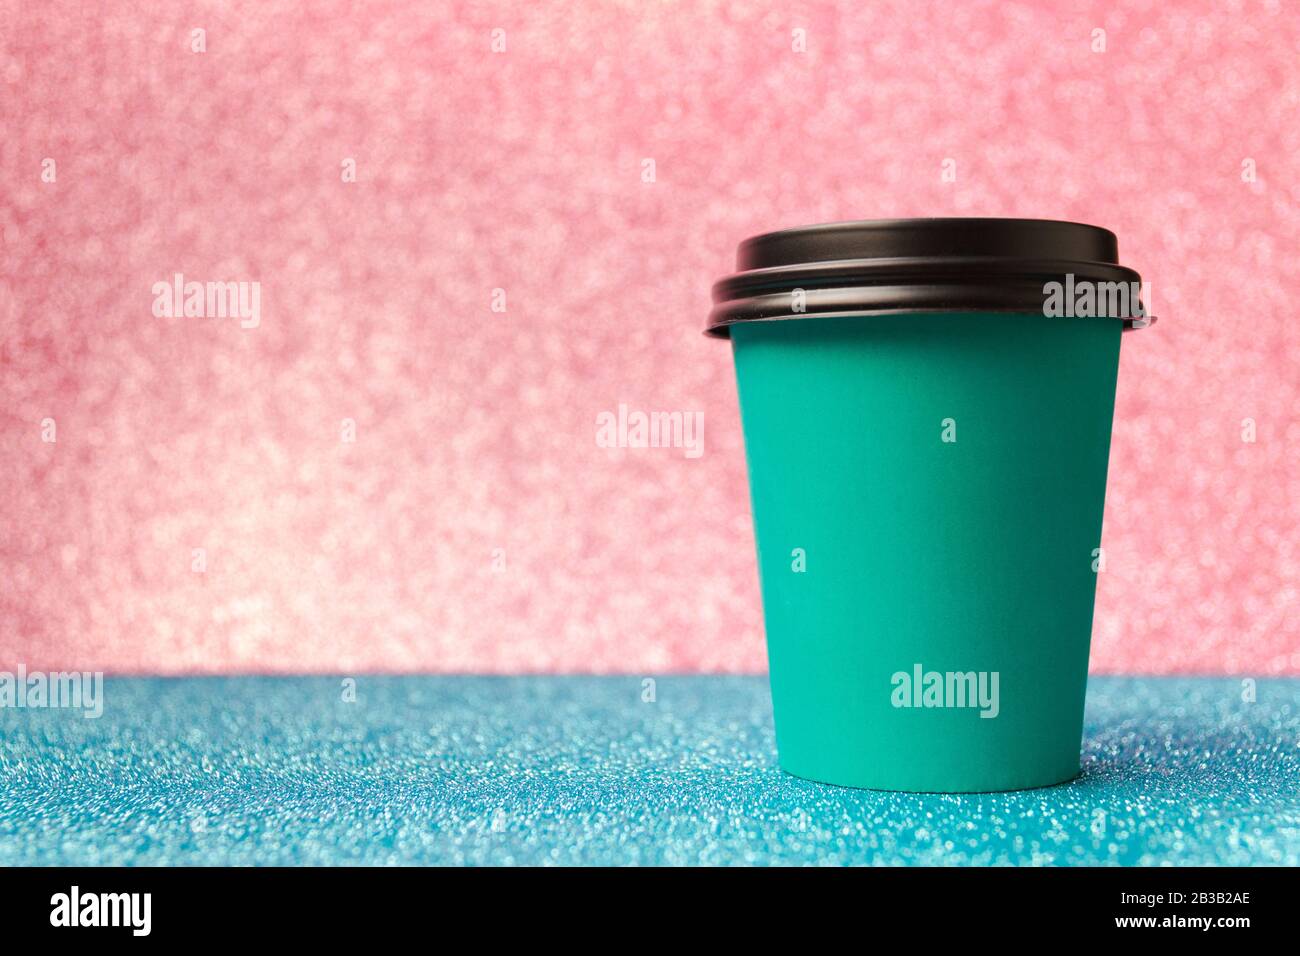 Good Morning Wake Up Awake Concept Simply Flat Lay Design Blue Paper Coffee Cup Isolated On Pink And Blue Shiny Colorful Trendy Background Stock Photo Alamy